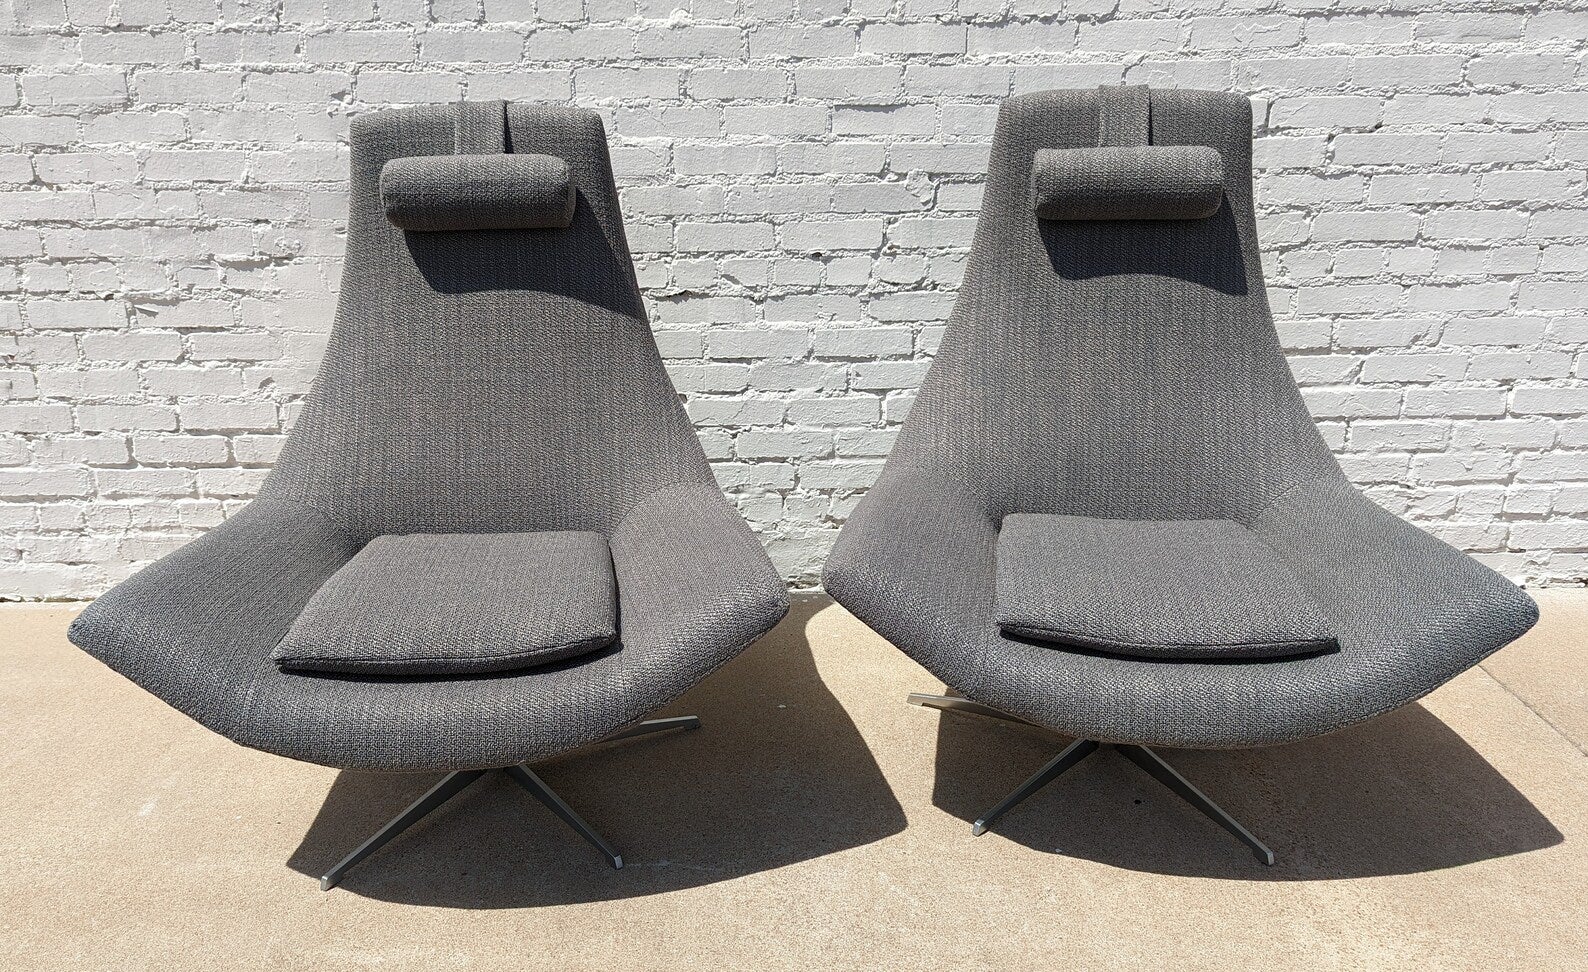 Pair of Mid Century Modern Italian Inspired High Back Swivel Chairs
 
Above average vintage condition and structurally sound. Upholstery is new. Bases very clean and well built. Outdoor listing pictures might appear slightly darker or more red than